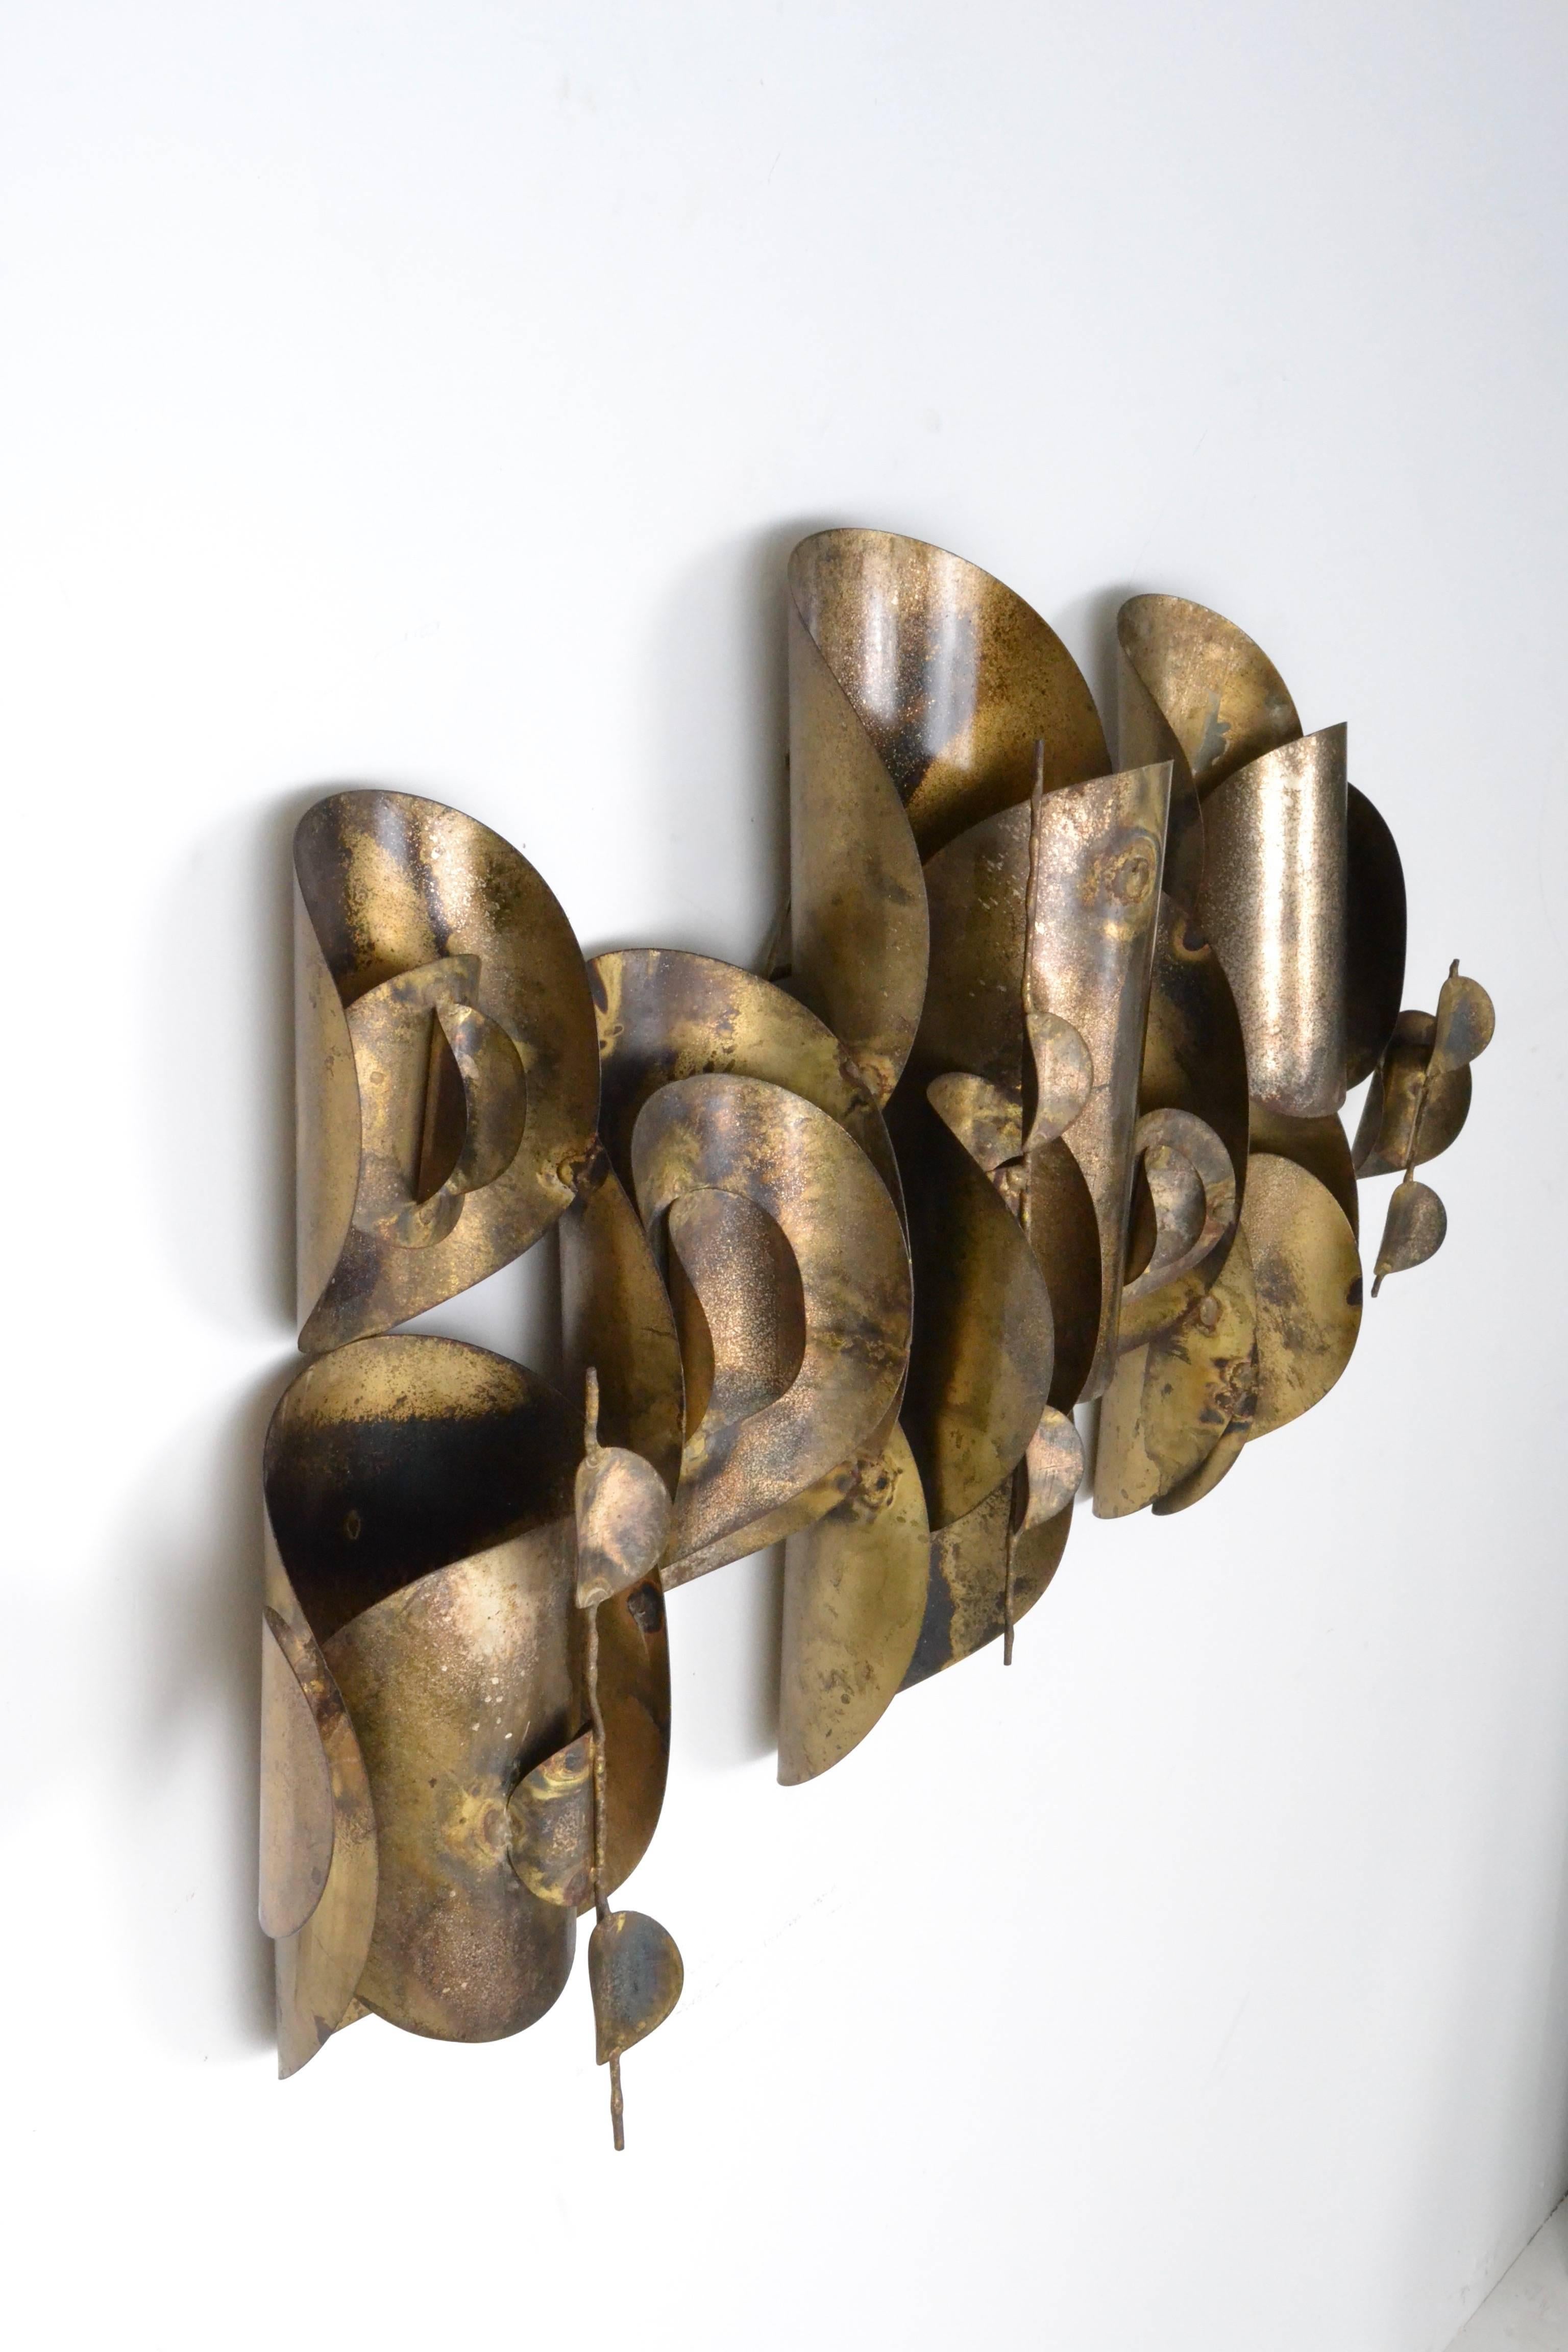 Mid-Century Modern gilt patinated wall sculpture. Nice form and construction.